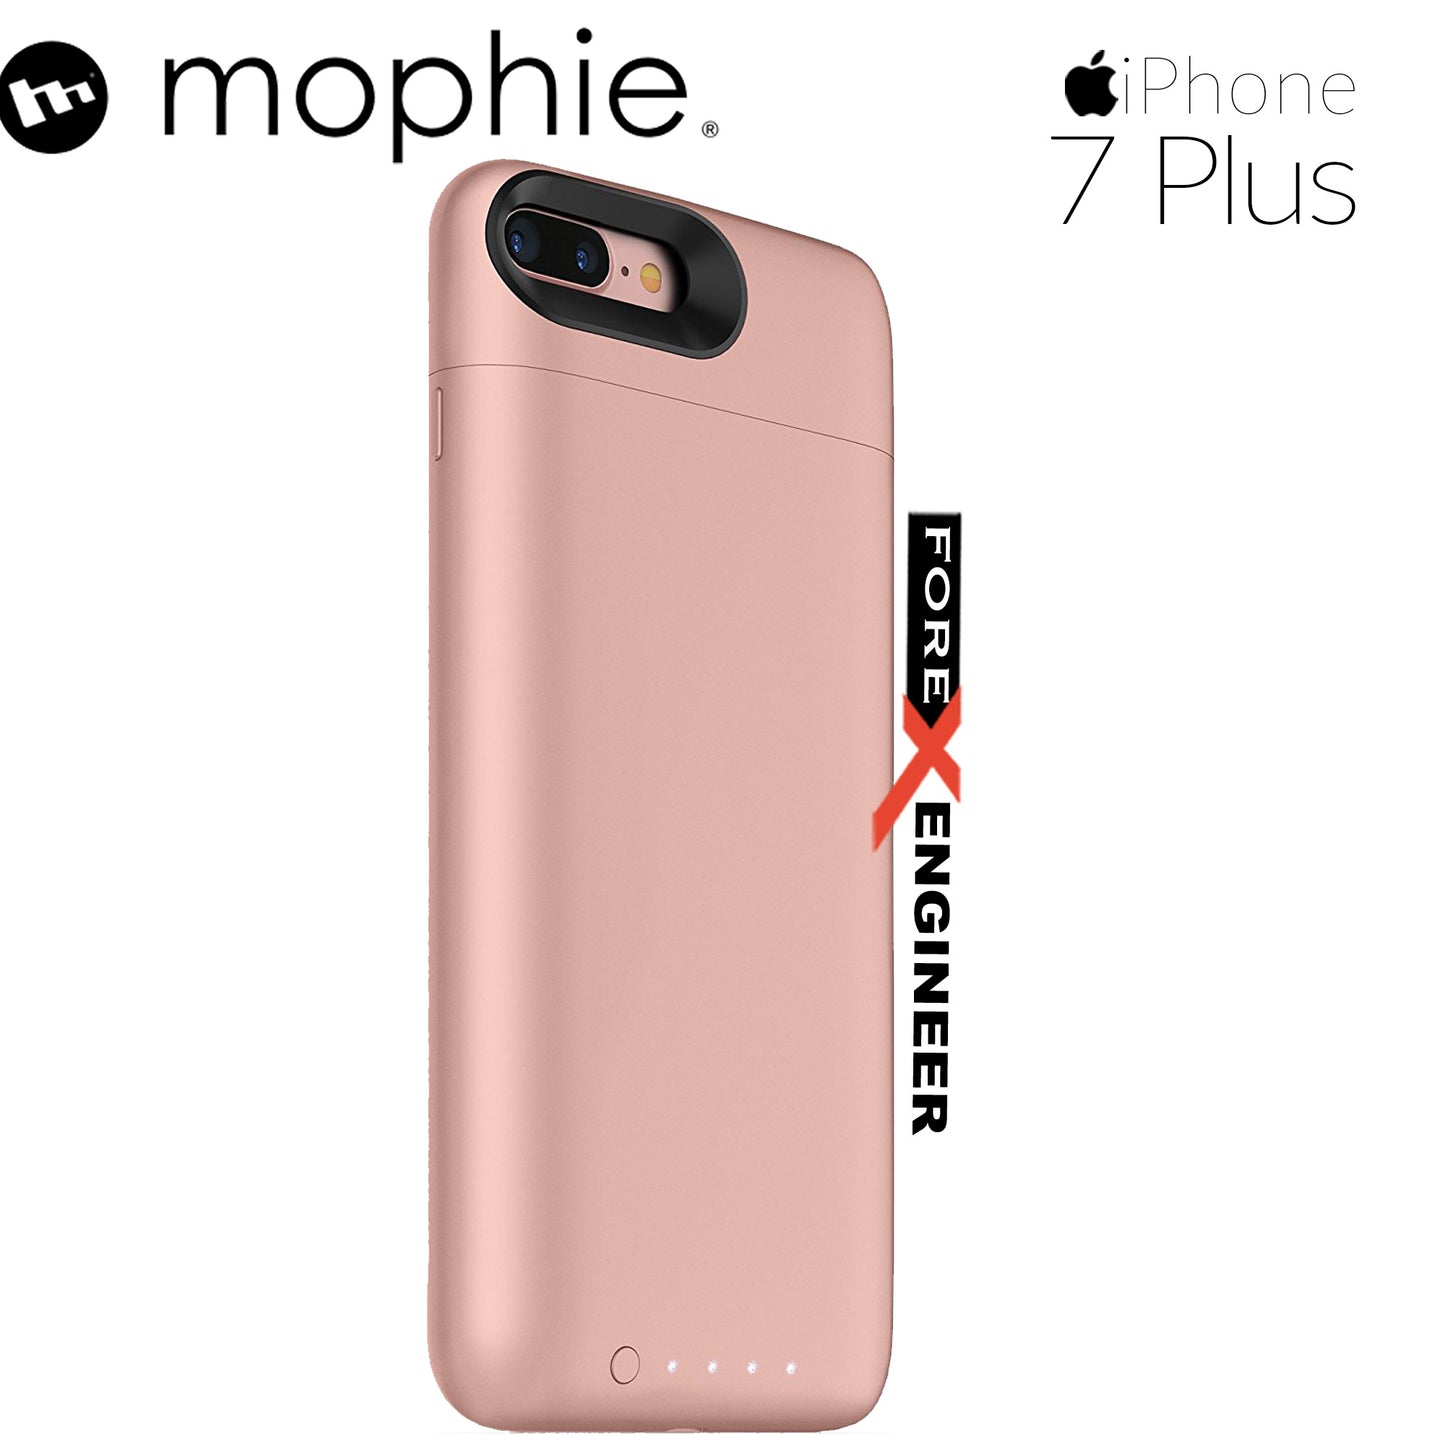 Mophie Juice Pack air for iphone 7 - 8 plus - rose gold color (wireless charge capable)